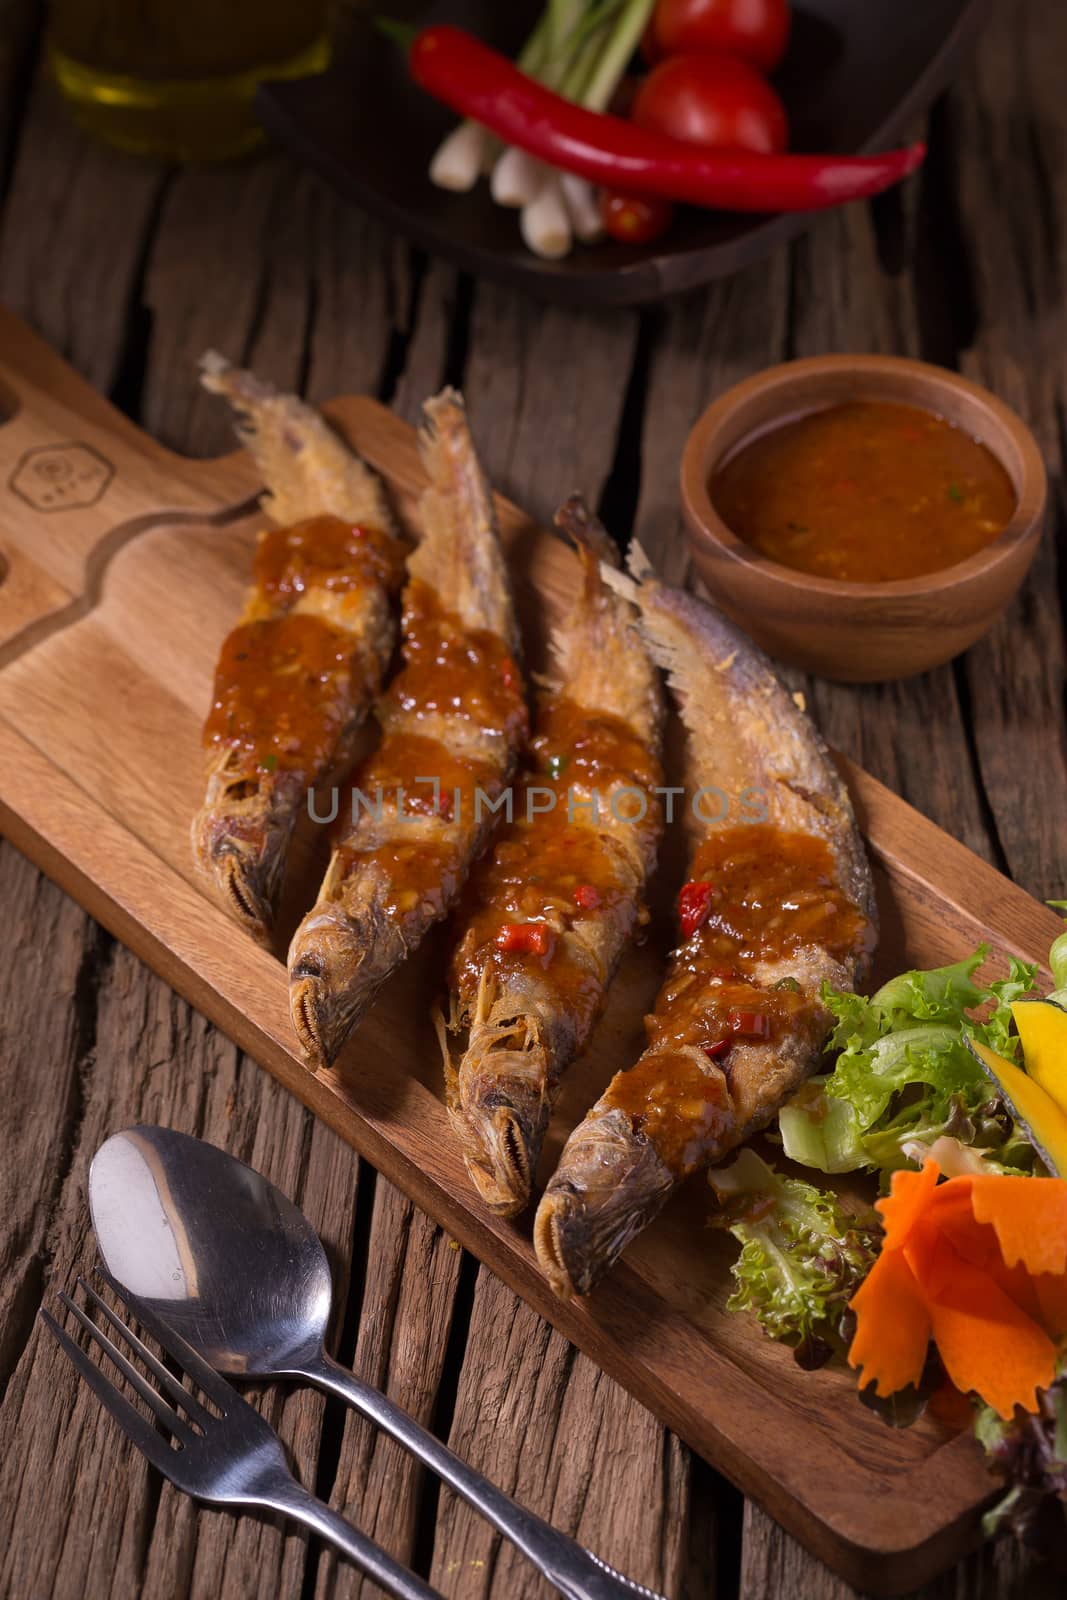 Fried Whisker sheat fish with chili sauce by kaiskynet